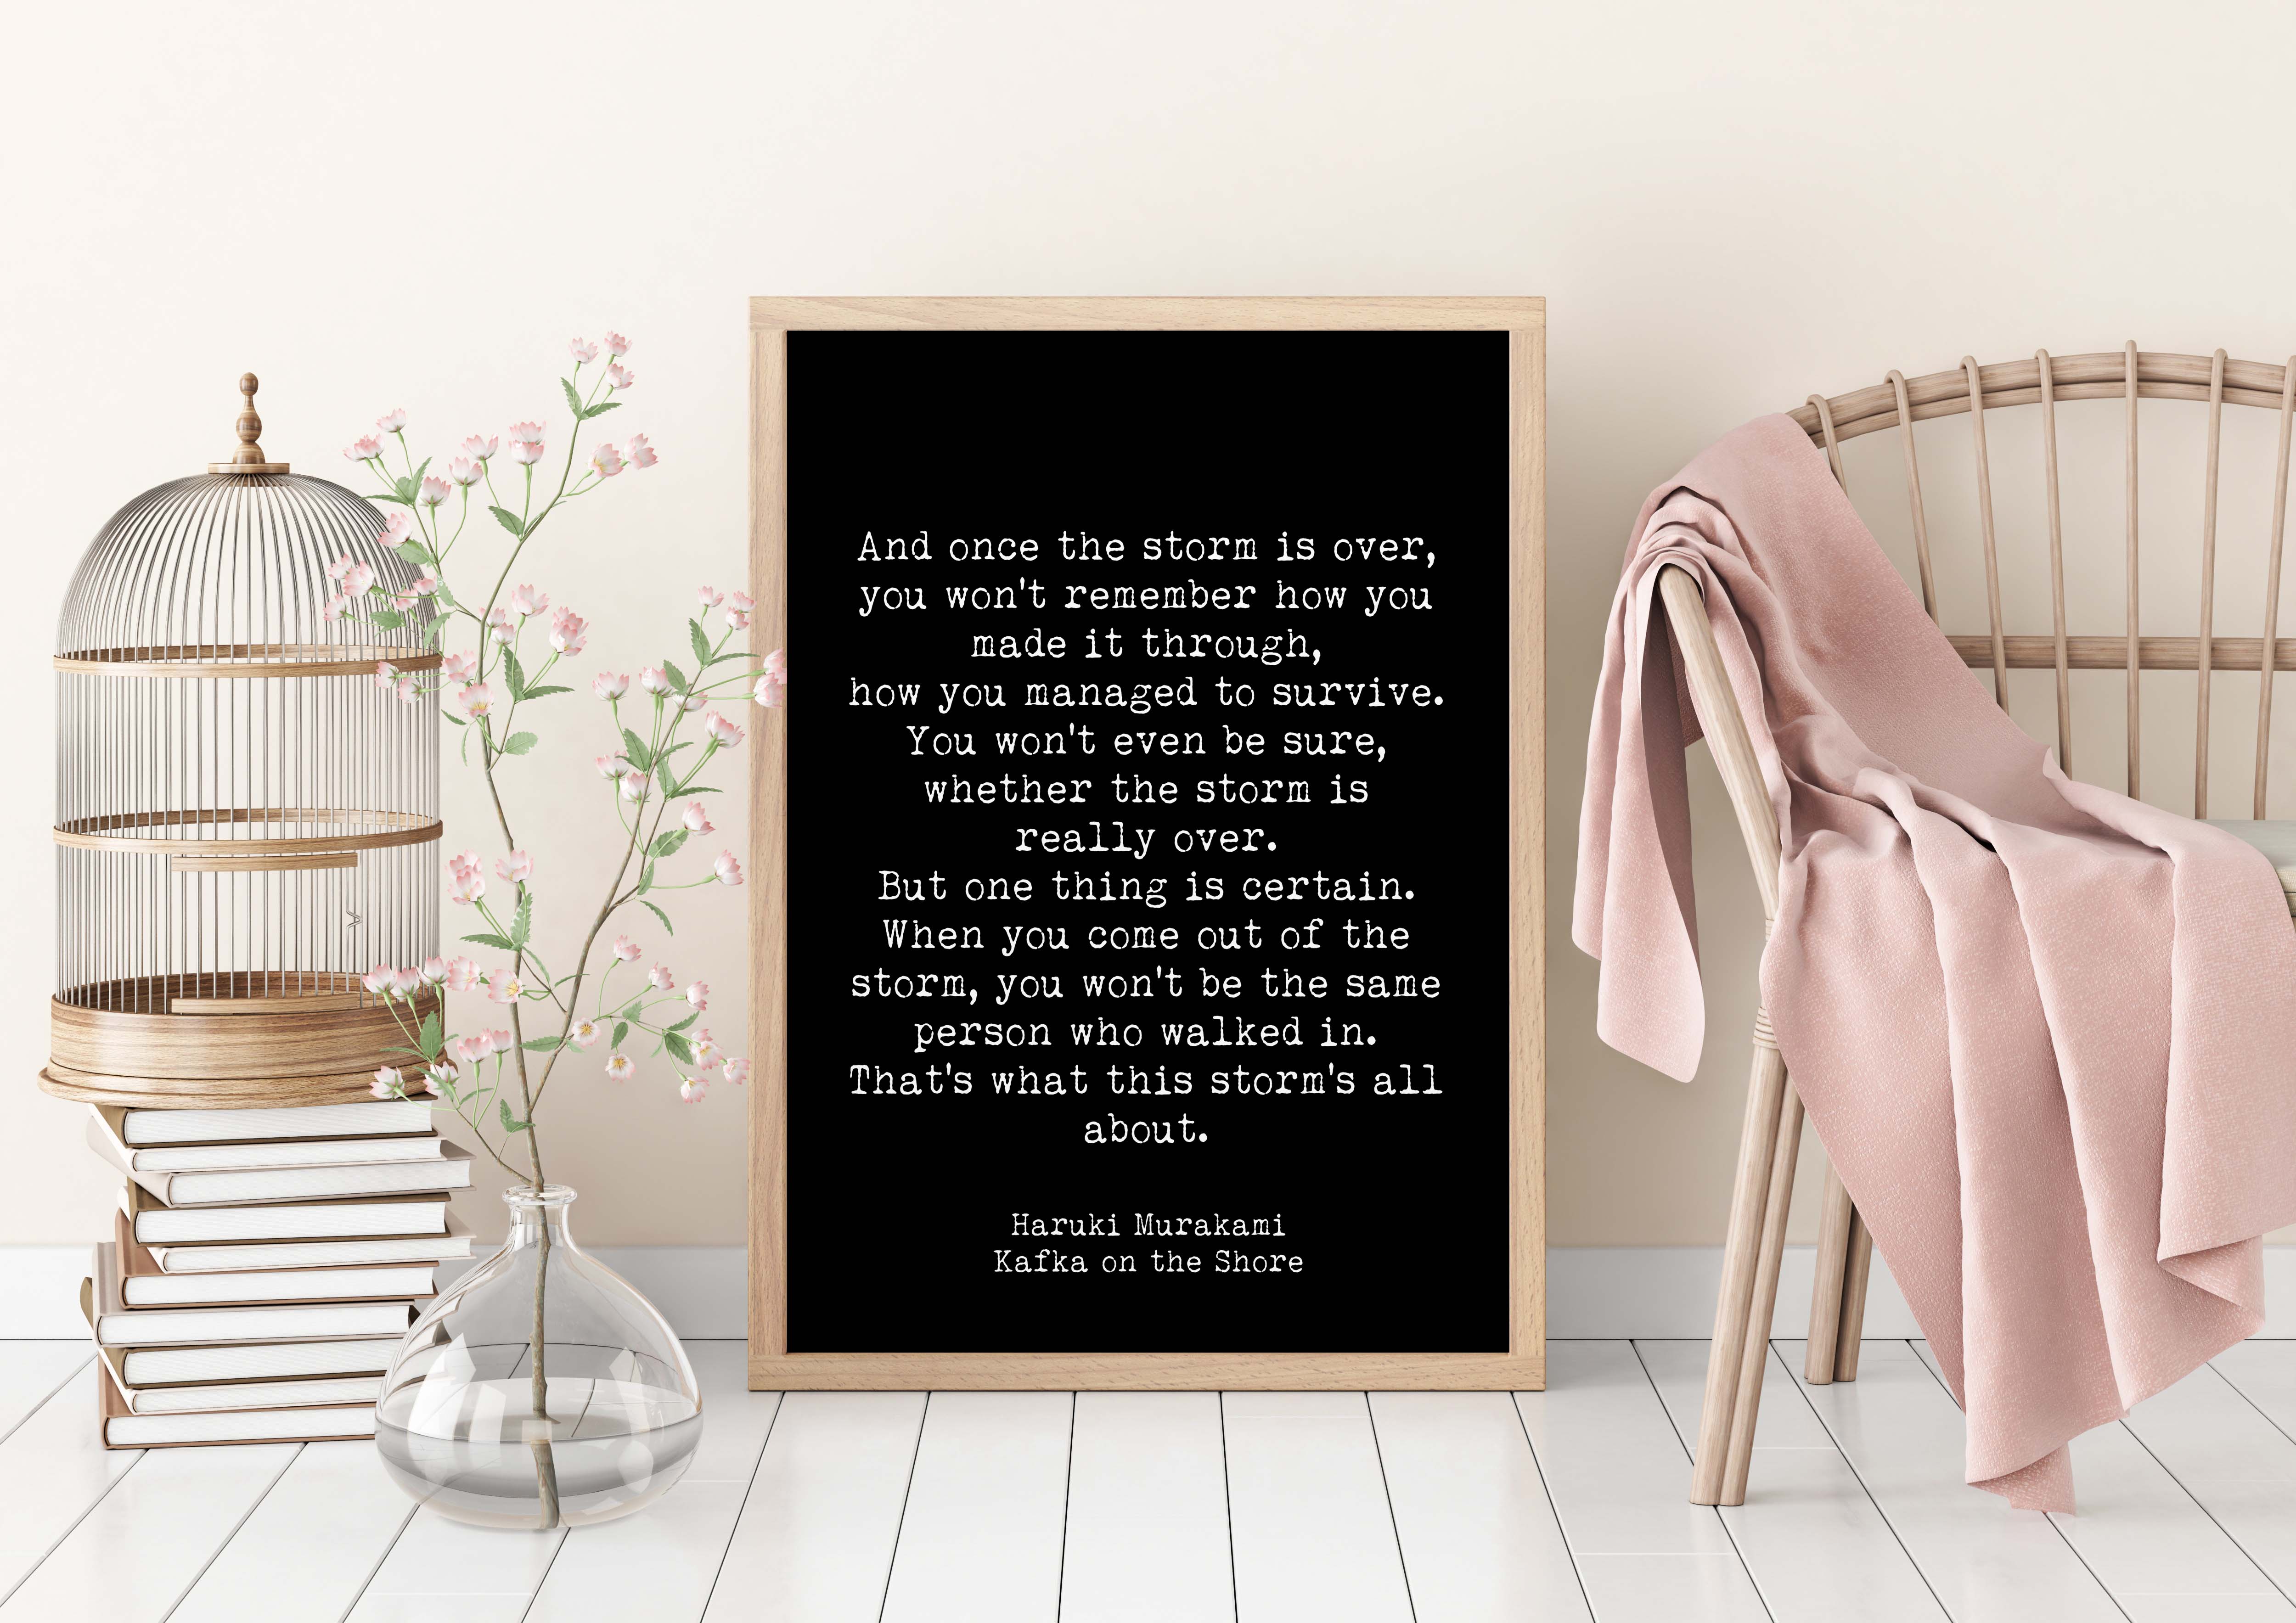 Once The Storm Is Over Haruki Murakami Quote Print